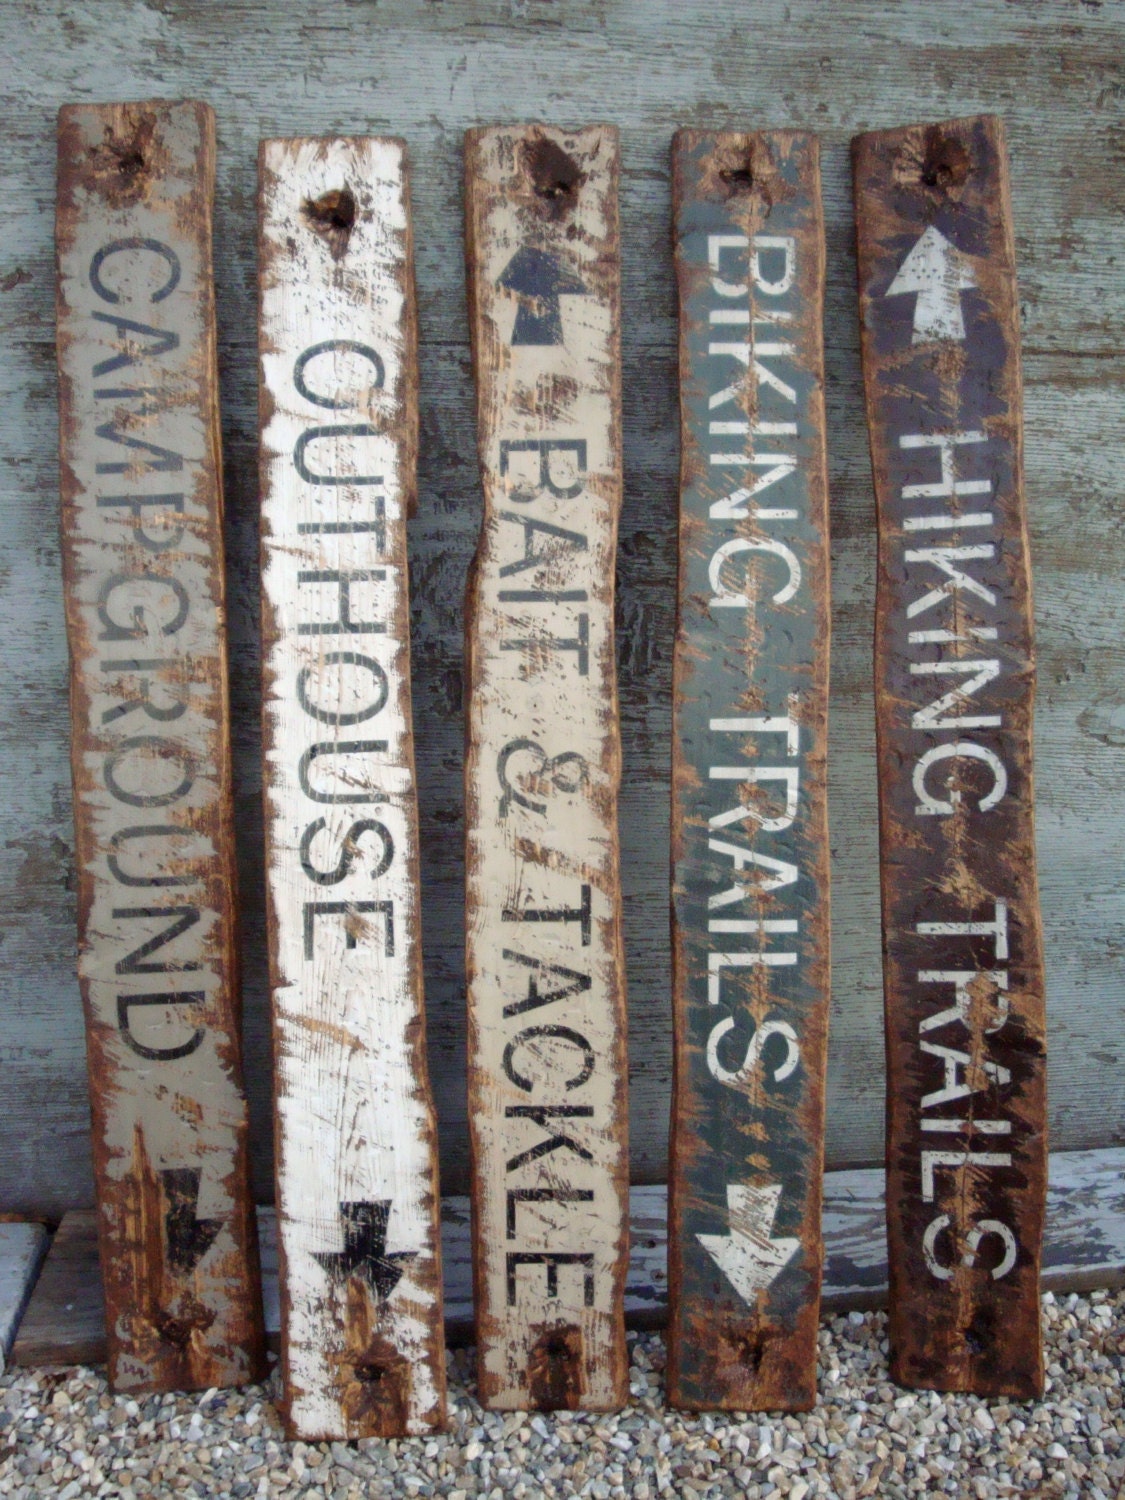 Biking Trails, Rustic rustic Trails, distressed  Hiking  Distressed Outhouse signs  Signs